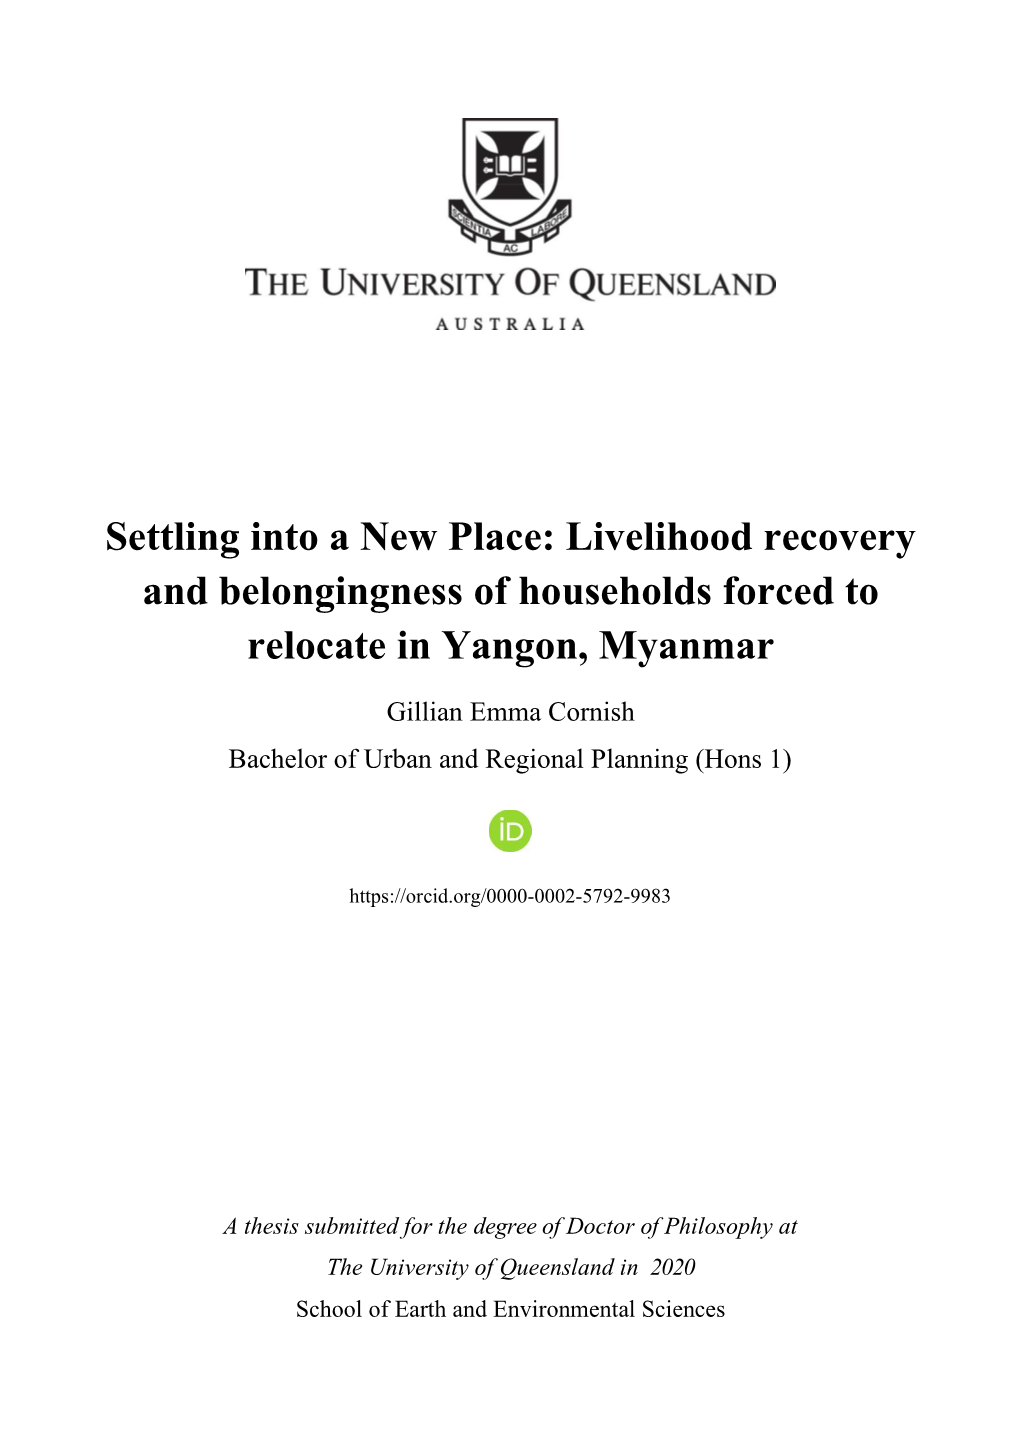 Livelihood Recovery and Belongingness of Households Forced to Relocate in Yangon, Myanmar